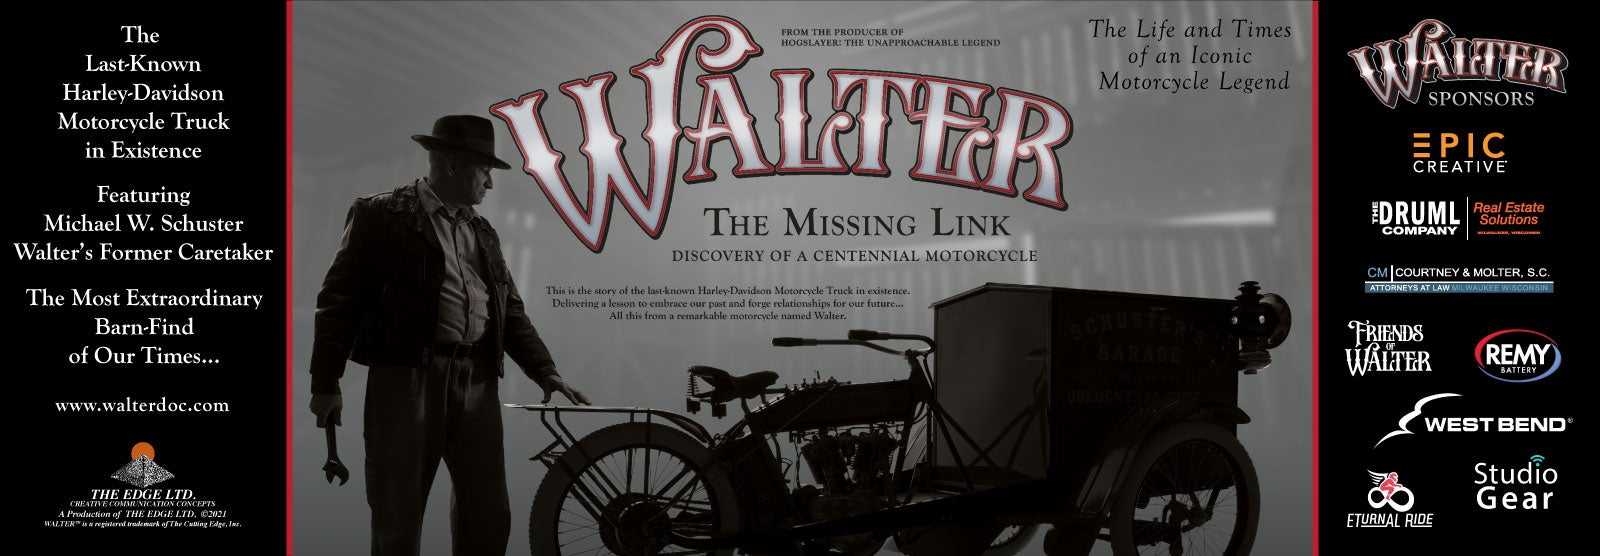 Walter: The Missing Link Discovery of a Centennial Motorcycle